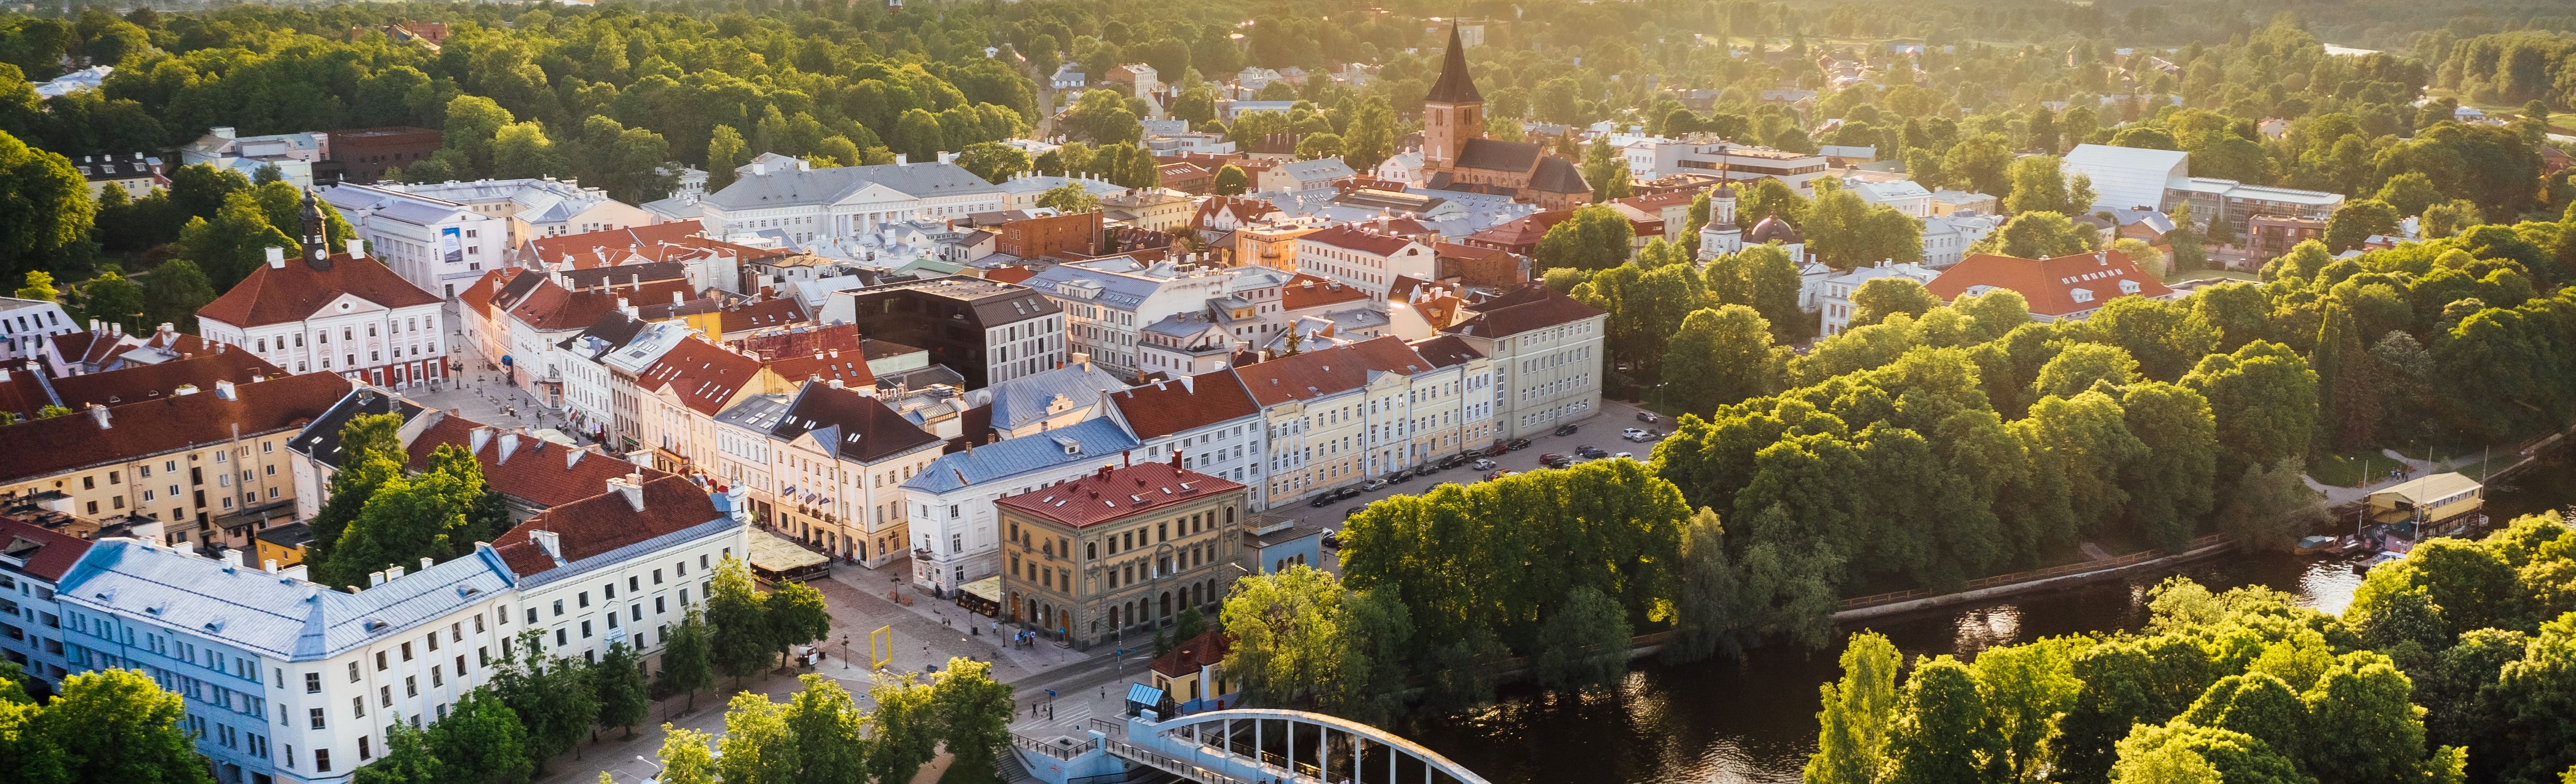 Tartu for business events